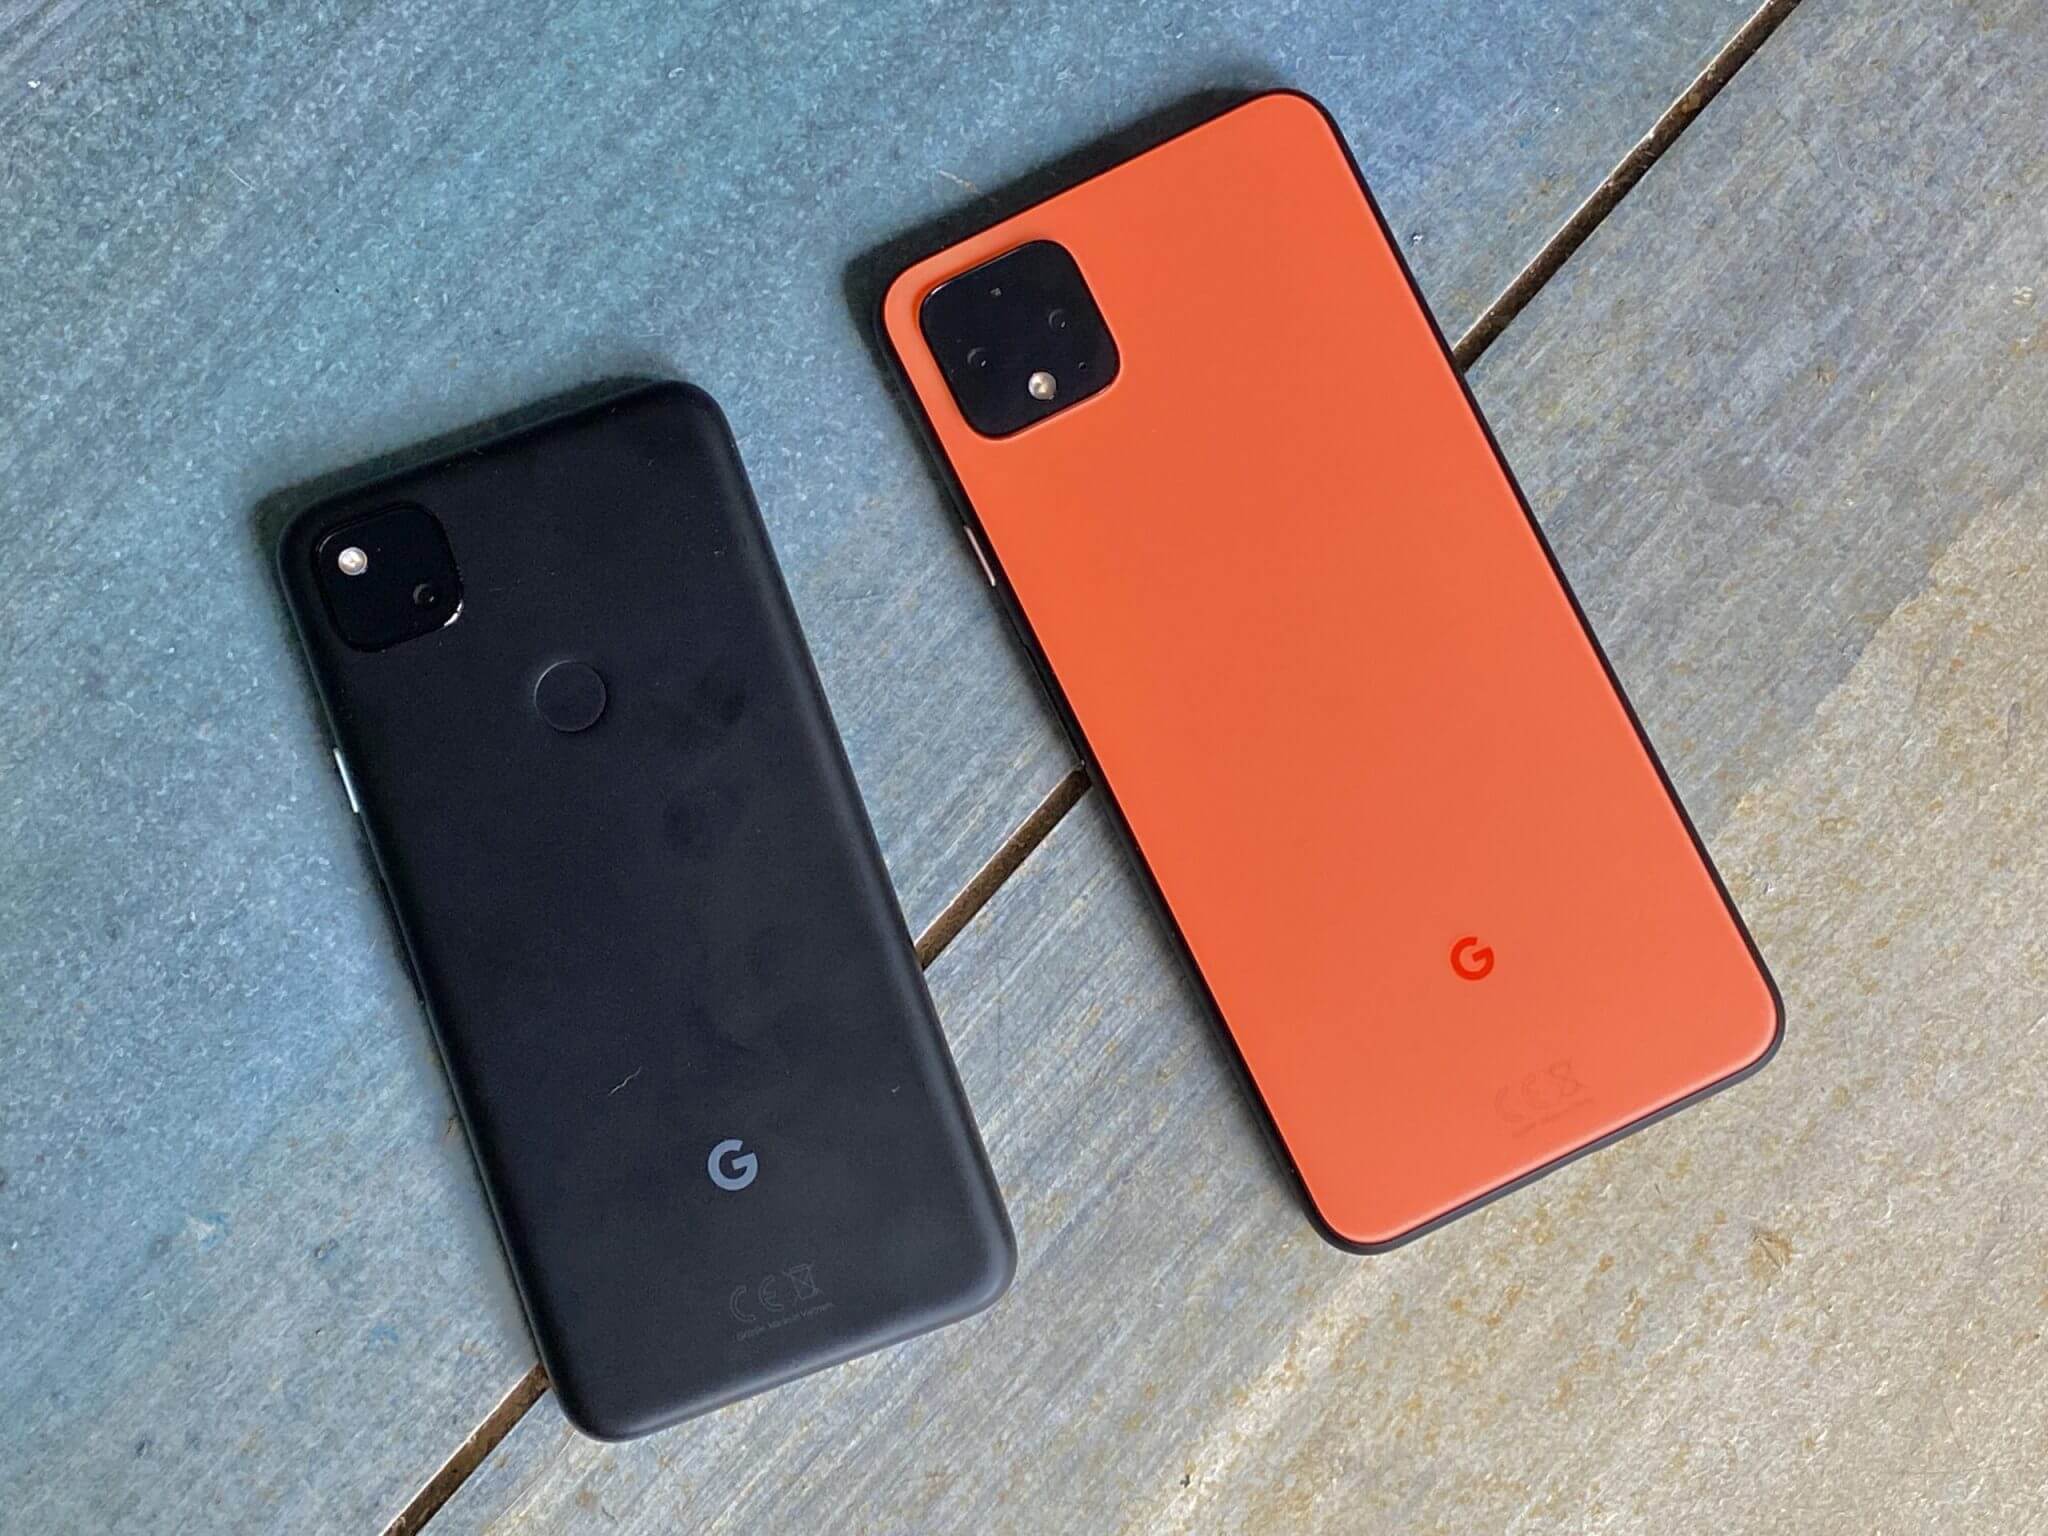 Pixel 4A and 4A XL: Rumors, release dates, specs, prices and more